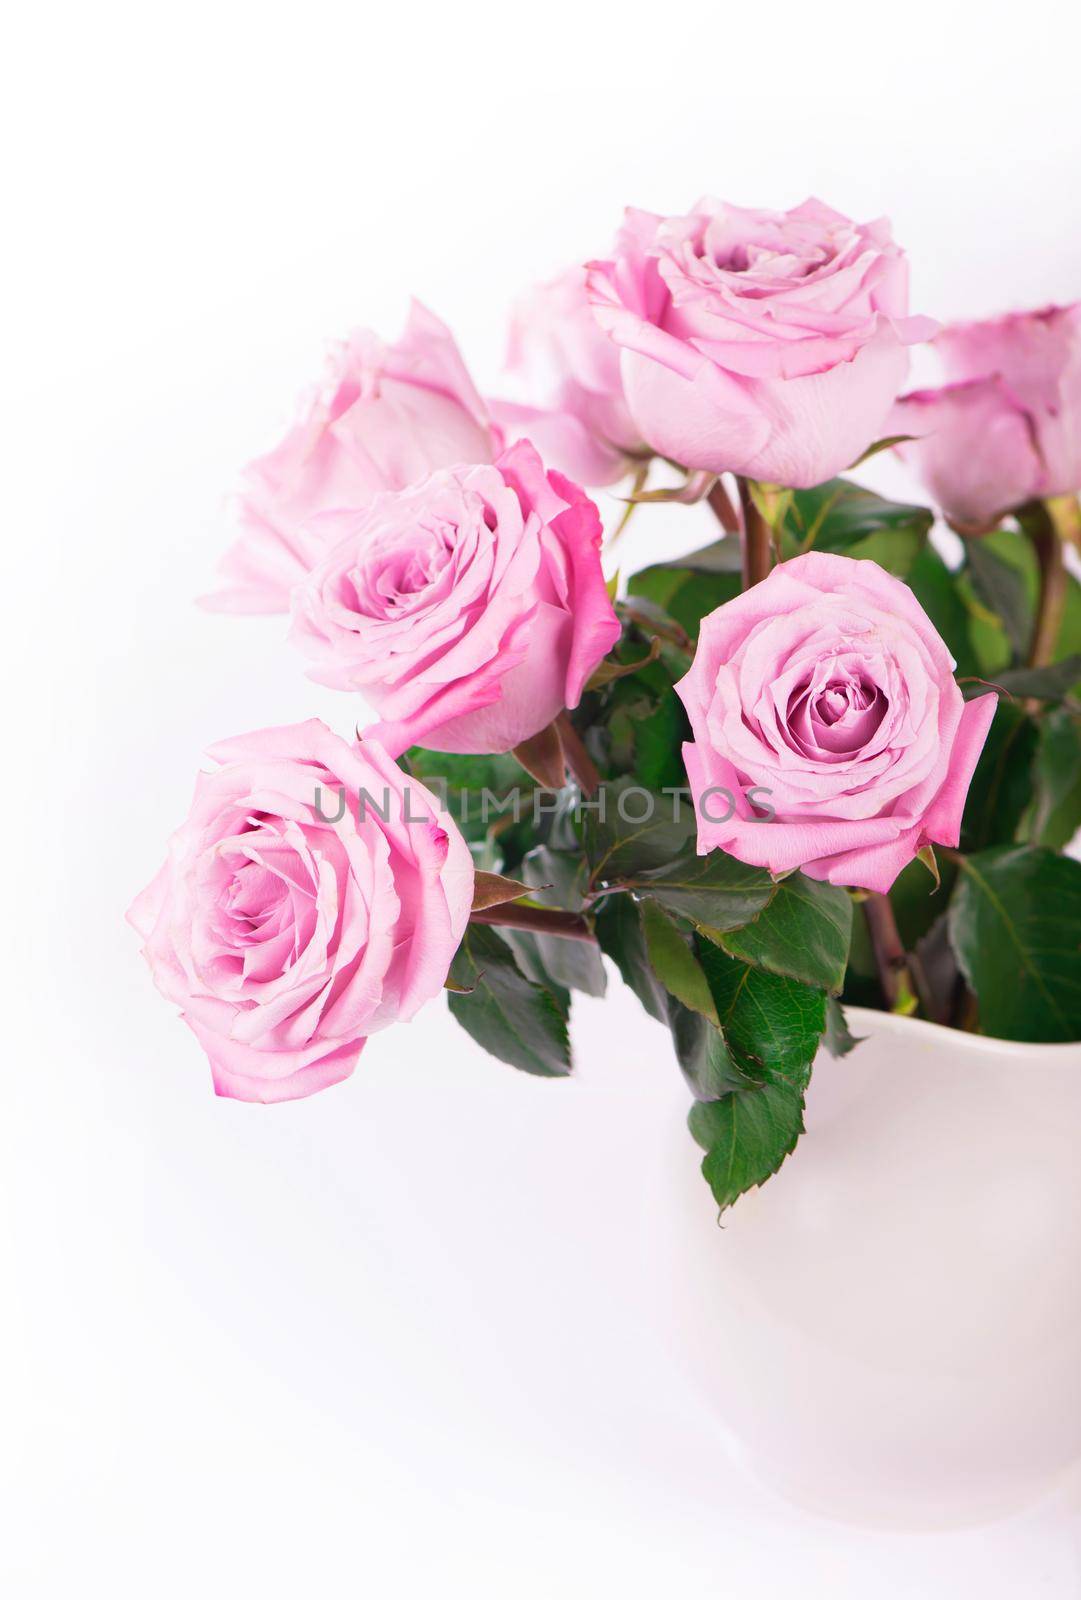 Flowers with clipping path, side view. Beautiful pink roses on stem with leaves isolated on white background. Natur object for design to Valentines Day, mothers day, anniversary by aprilphoto